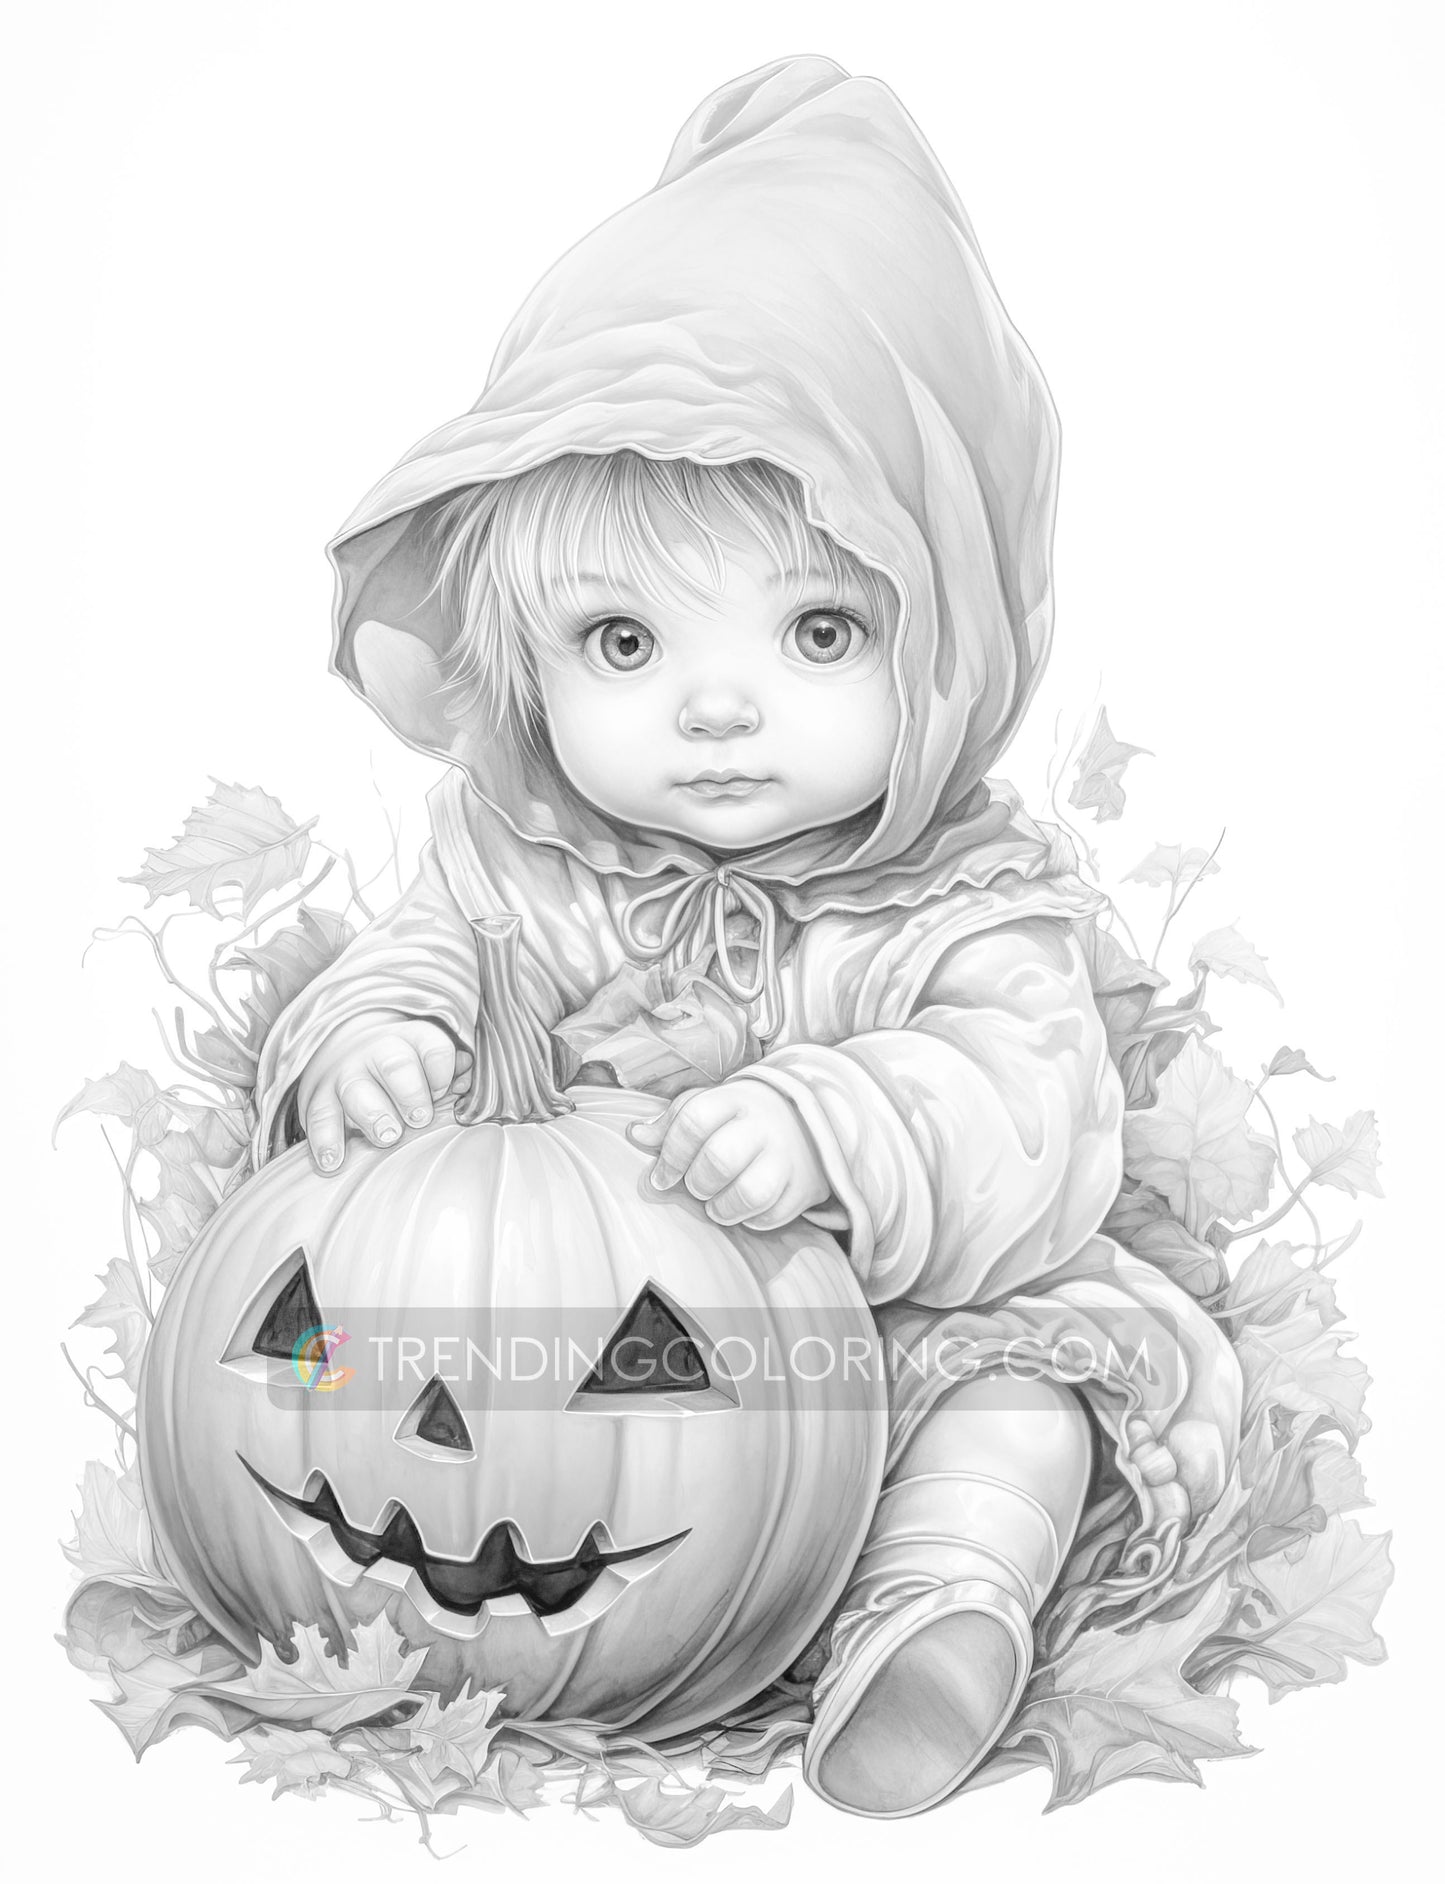 25 Pumpkin World Grayscale Coloring Pages - Instant Download - Printable PDF Dark/Light